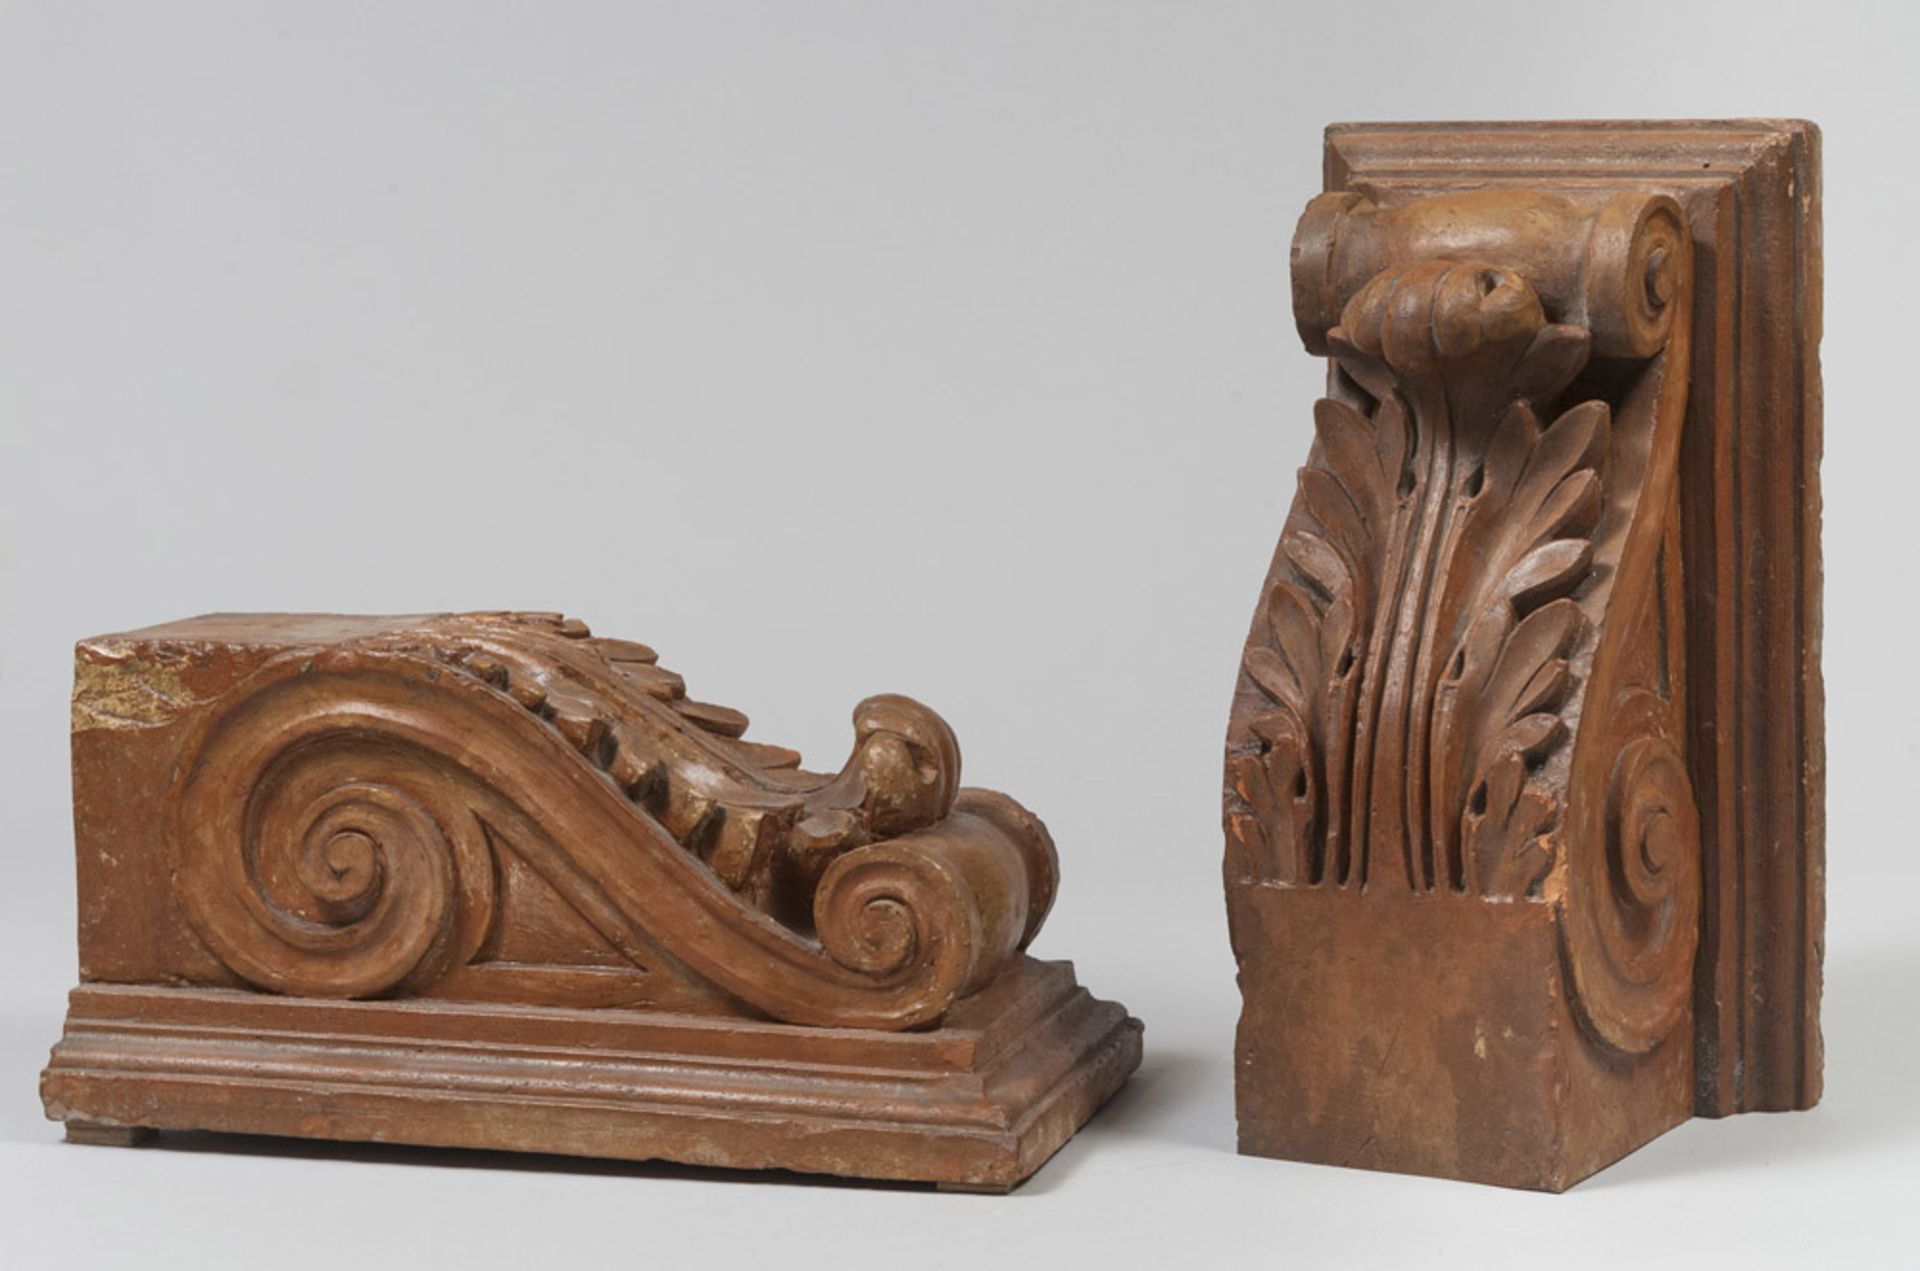 A PAIR OF EARTHENWARE FRIEZES, 19TH CENTURY to light brown lacquer, representing shelves with